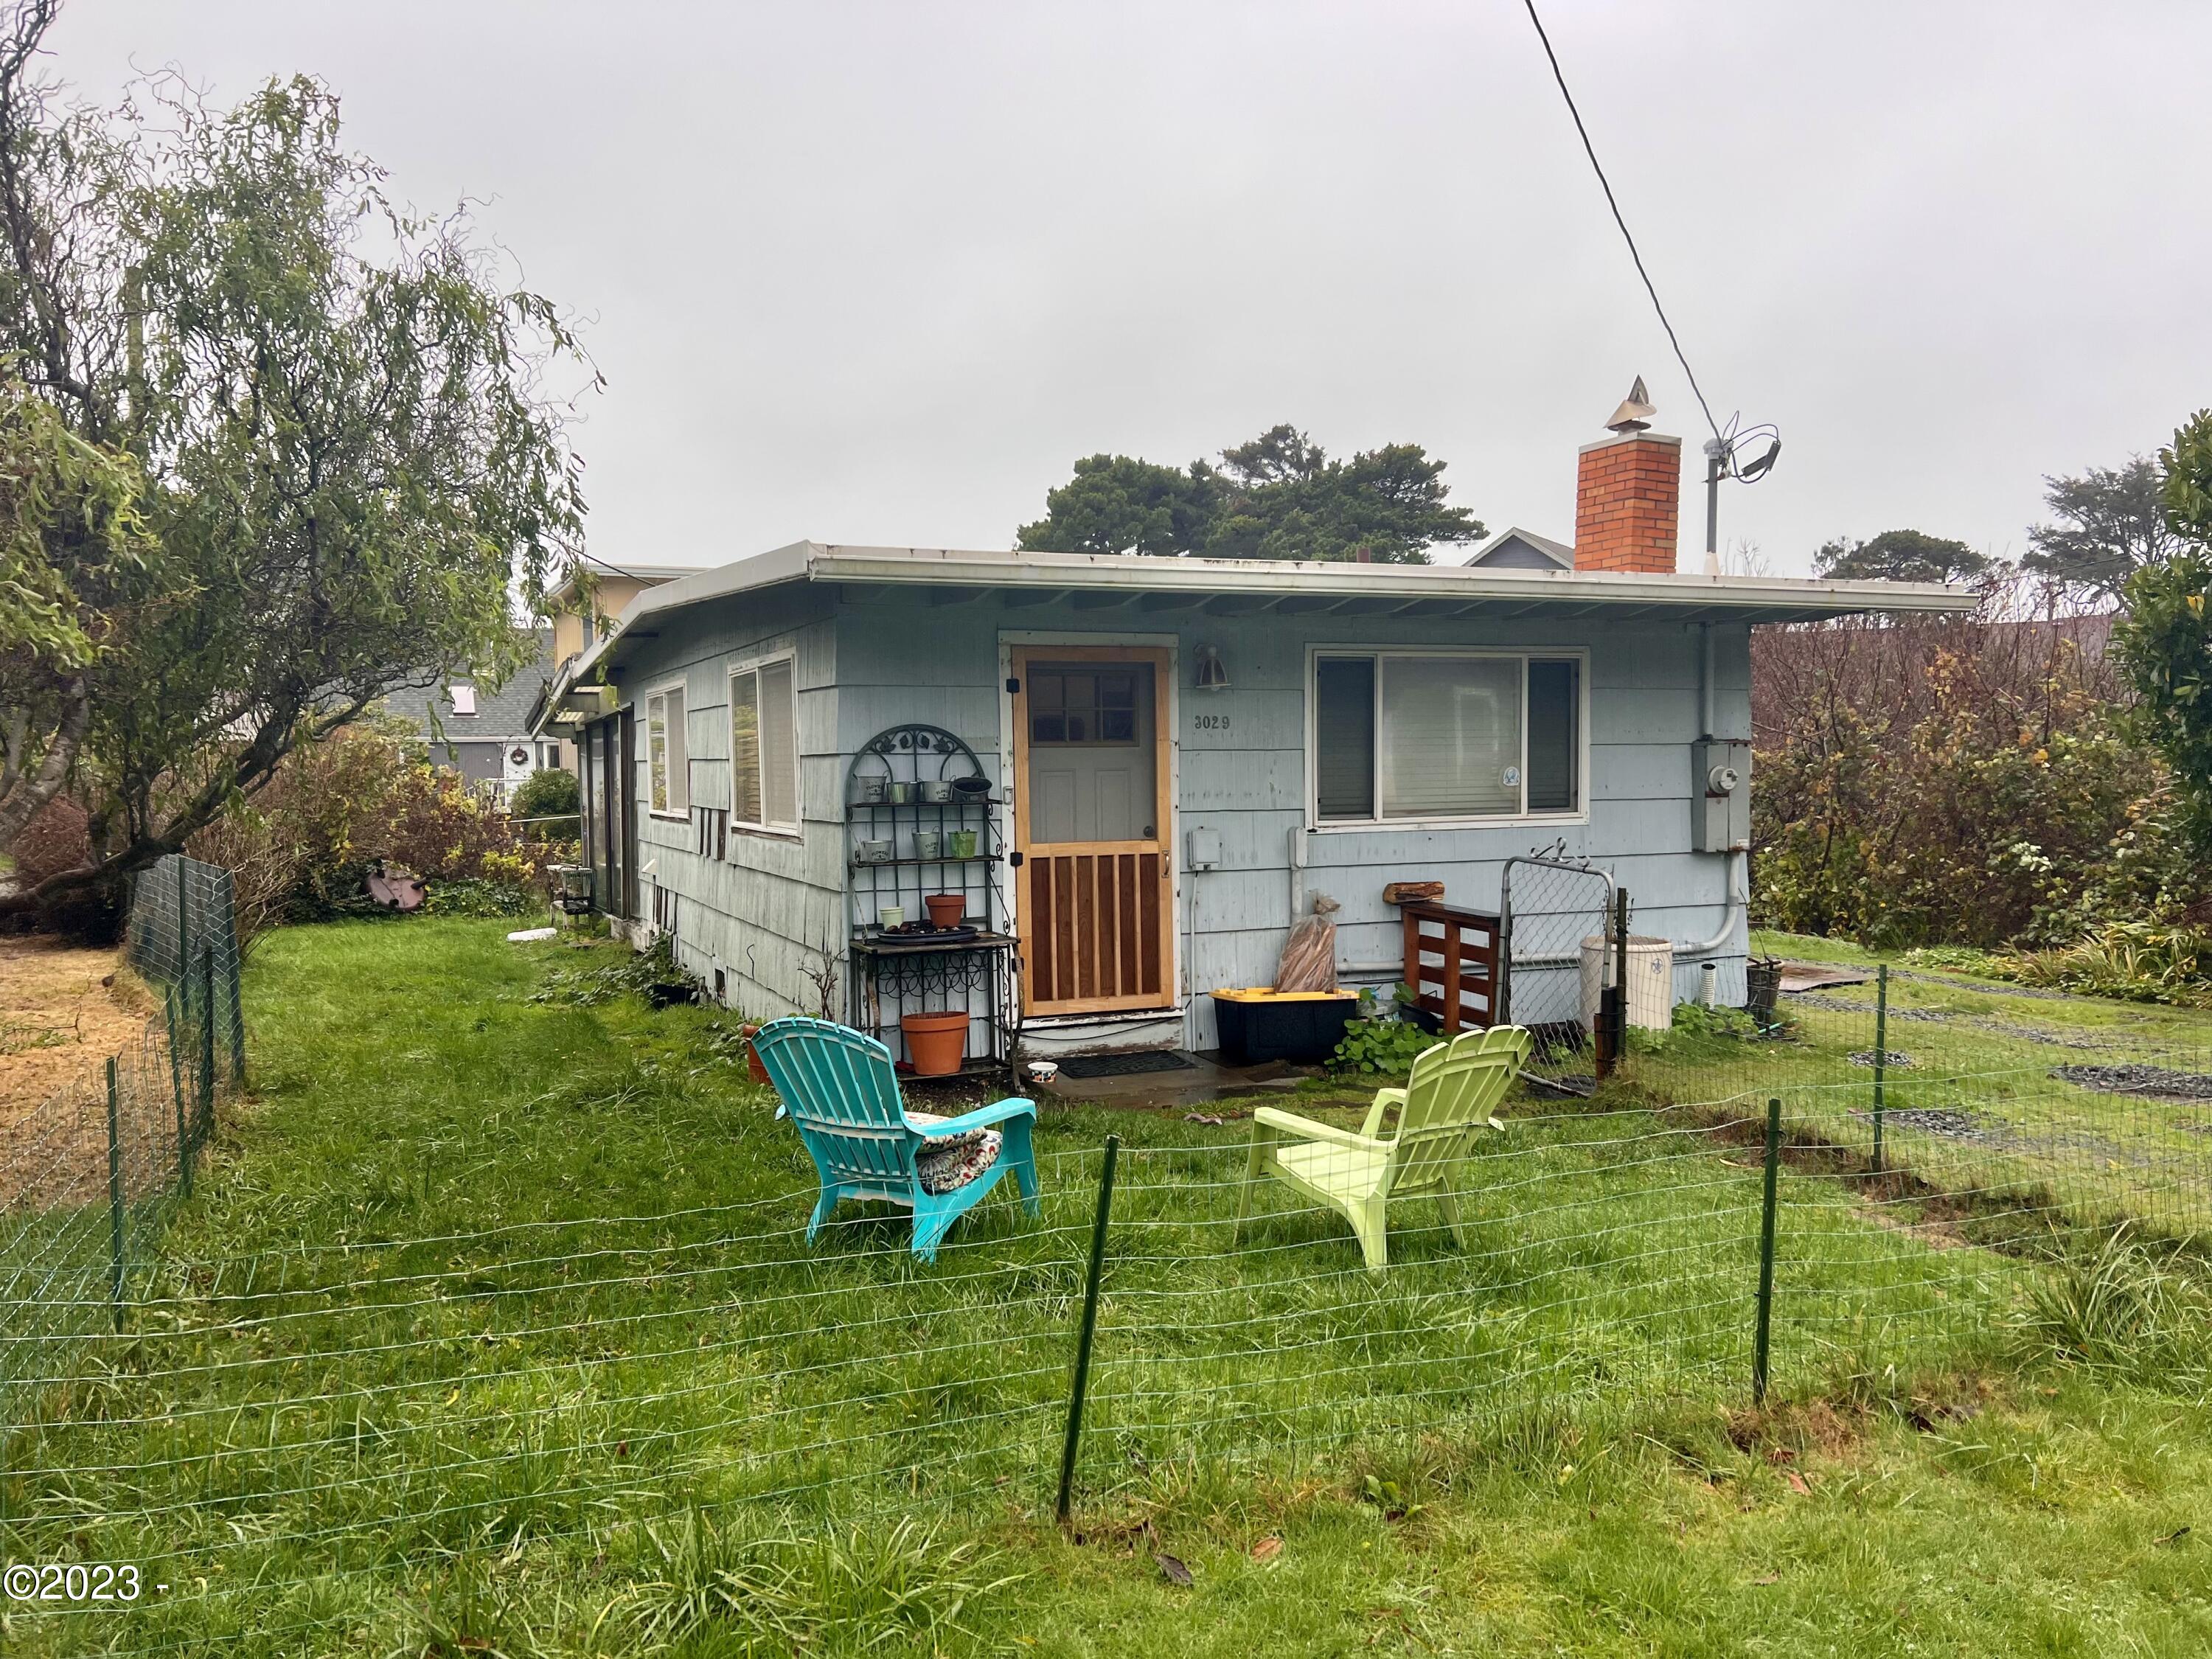 3029 NW Lee Avenue Depoe Bay, Gleneden Beach, Lincoln City, Newport, Otis, Rose Lodge, Seal Rock, Waldport, Yachats, To Home Listings - Amy Plechaty, Emerald Coast Realty Real Estate, homes for sale, property for sale